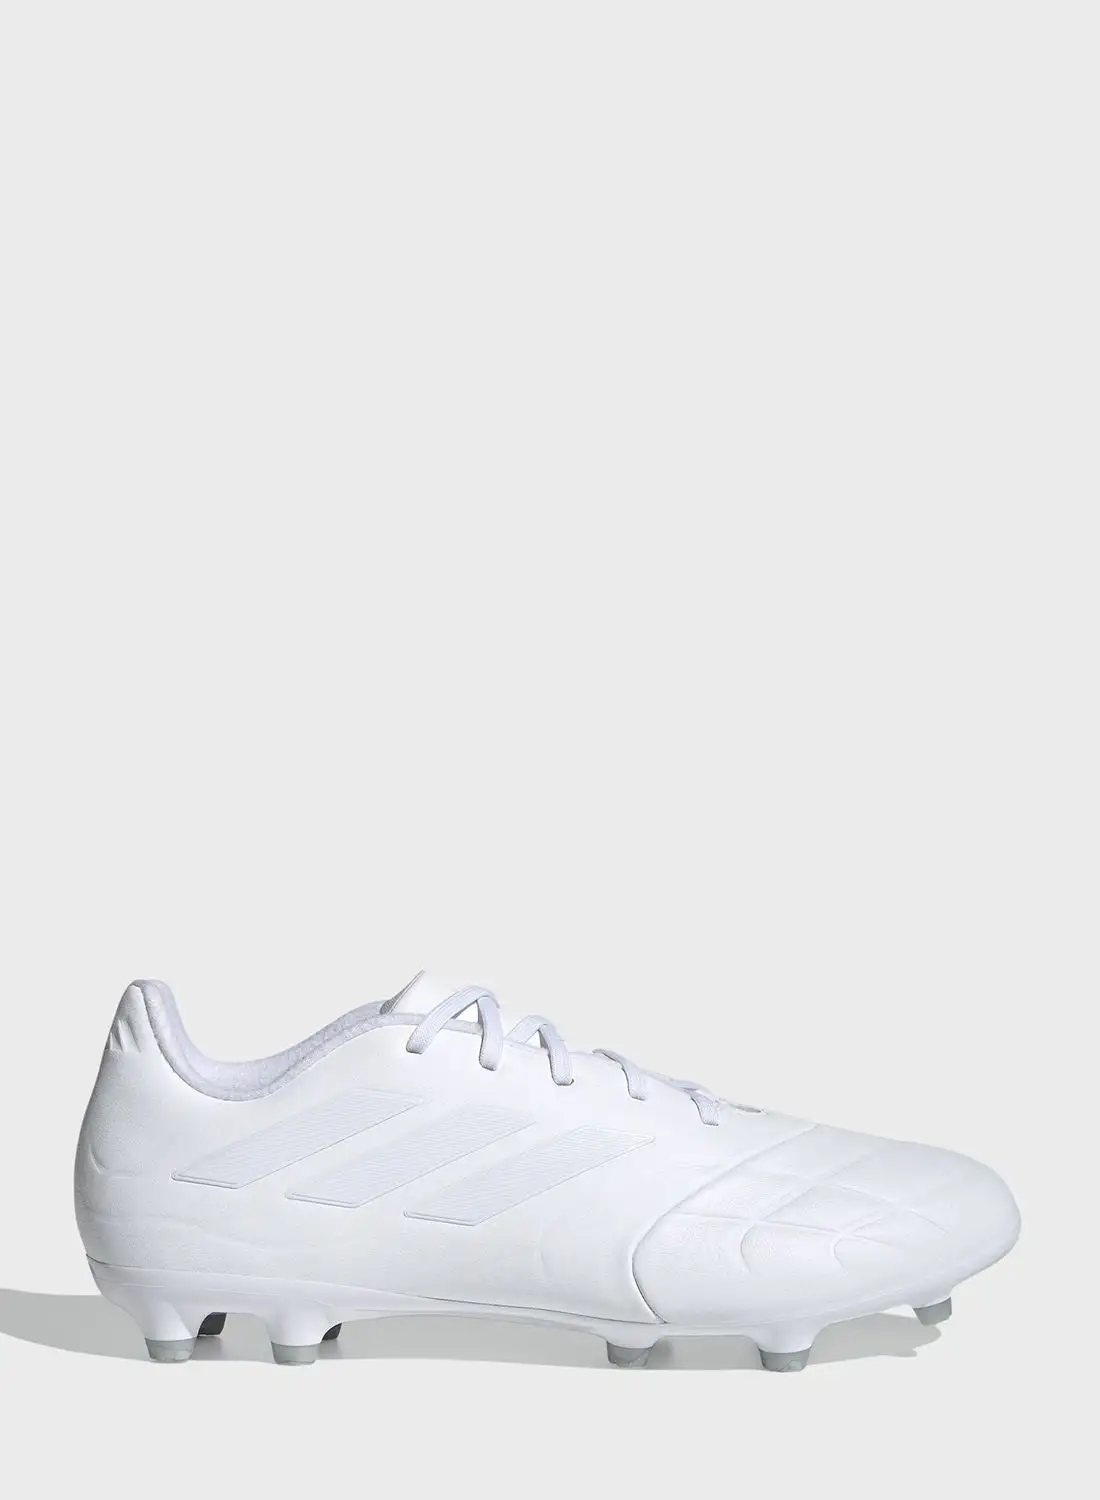 Adidas Copa Pure.3 Shoes